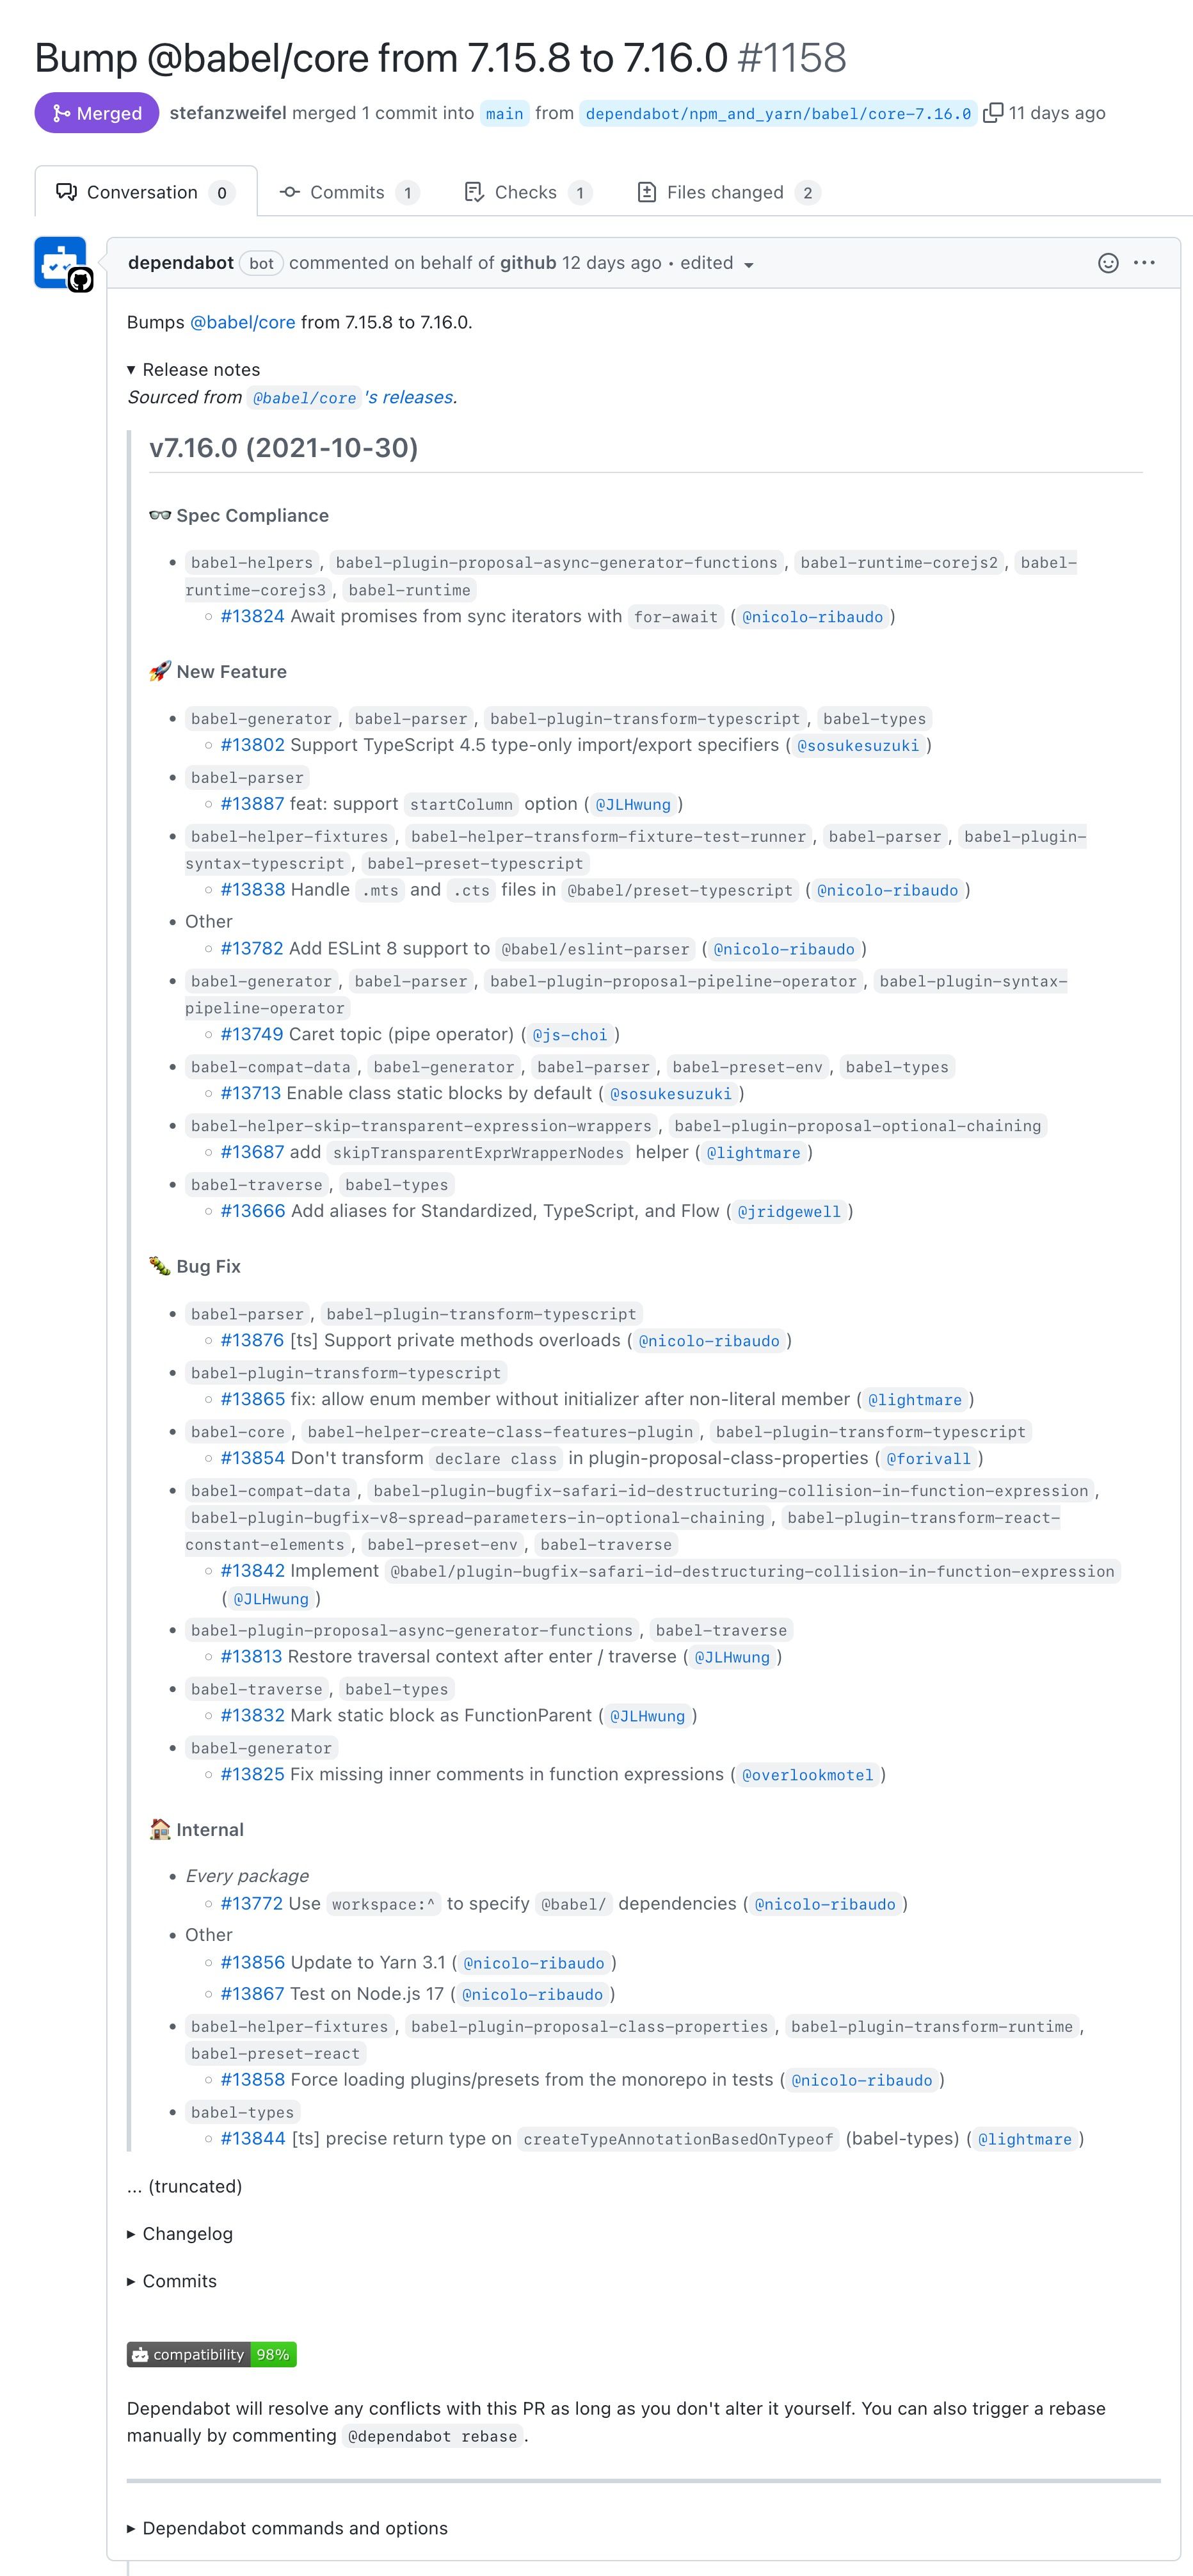 Screenshot of a Pull Request showing the release notes related to the @babel/core dependency.